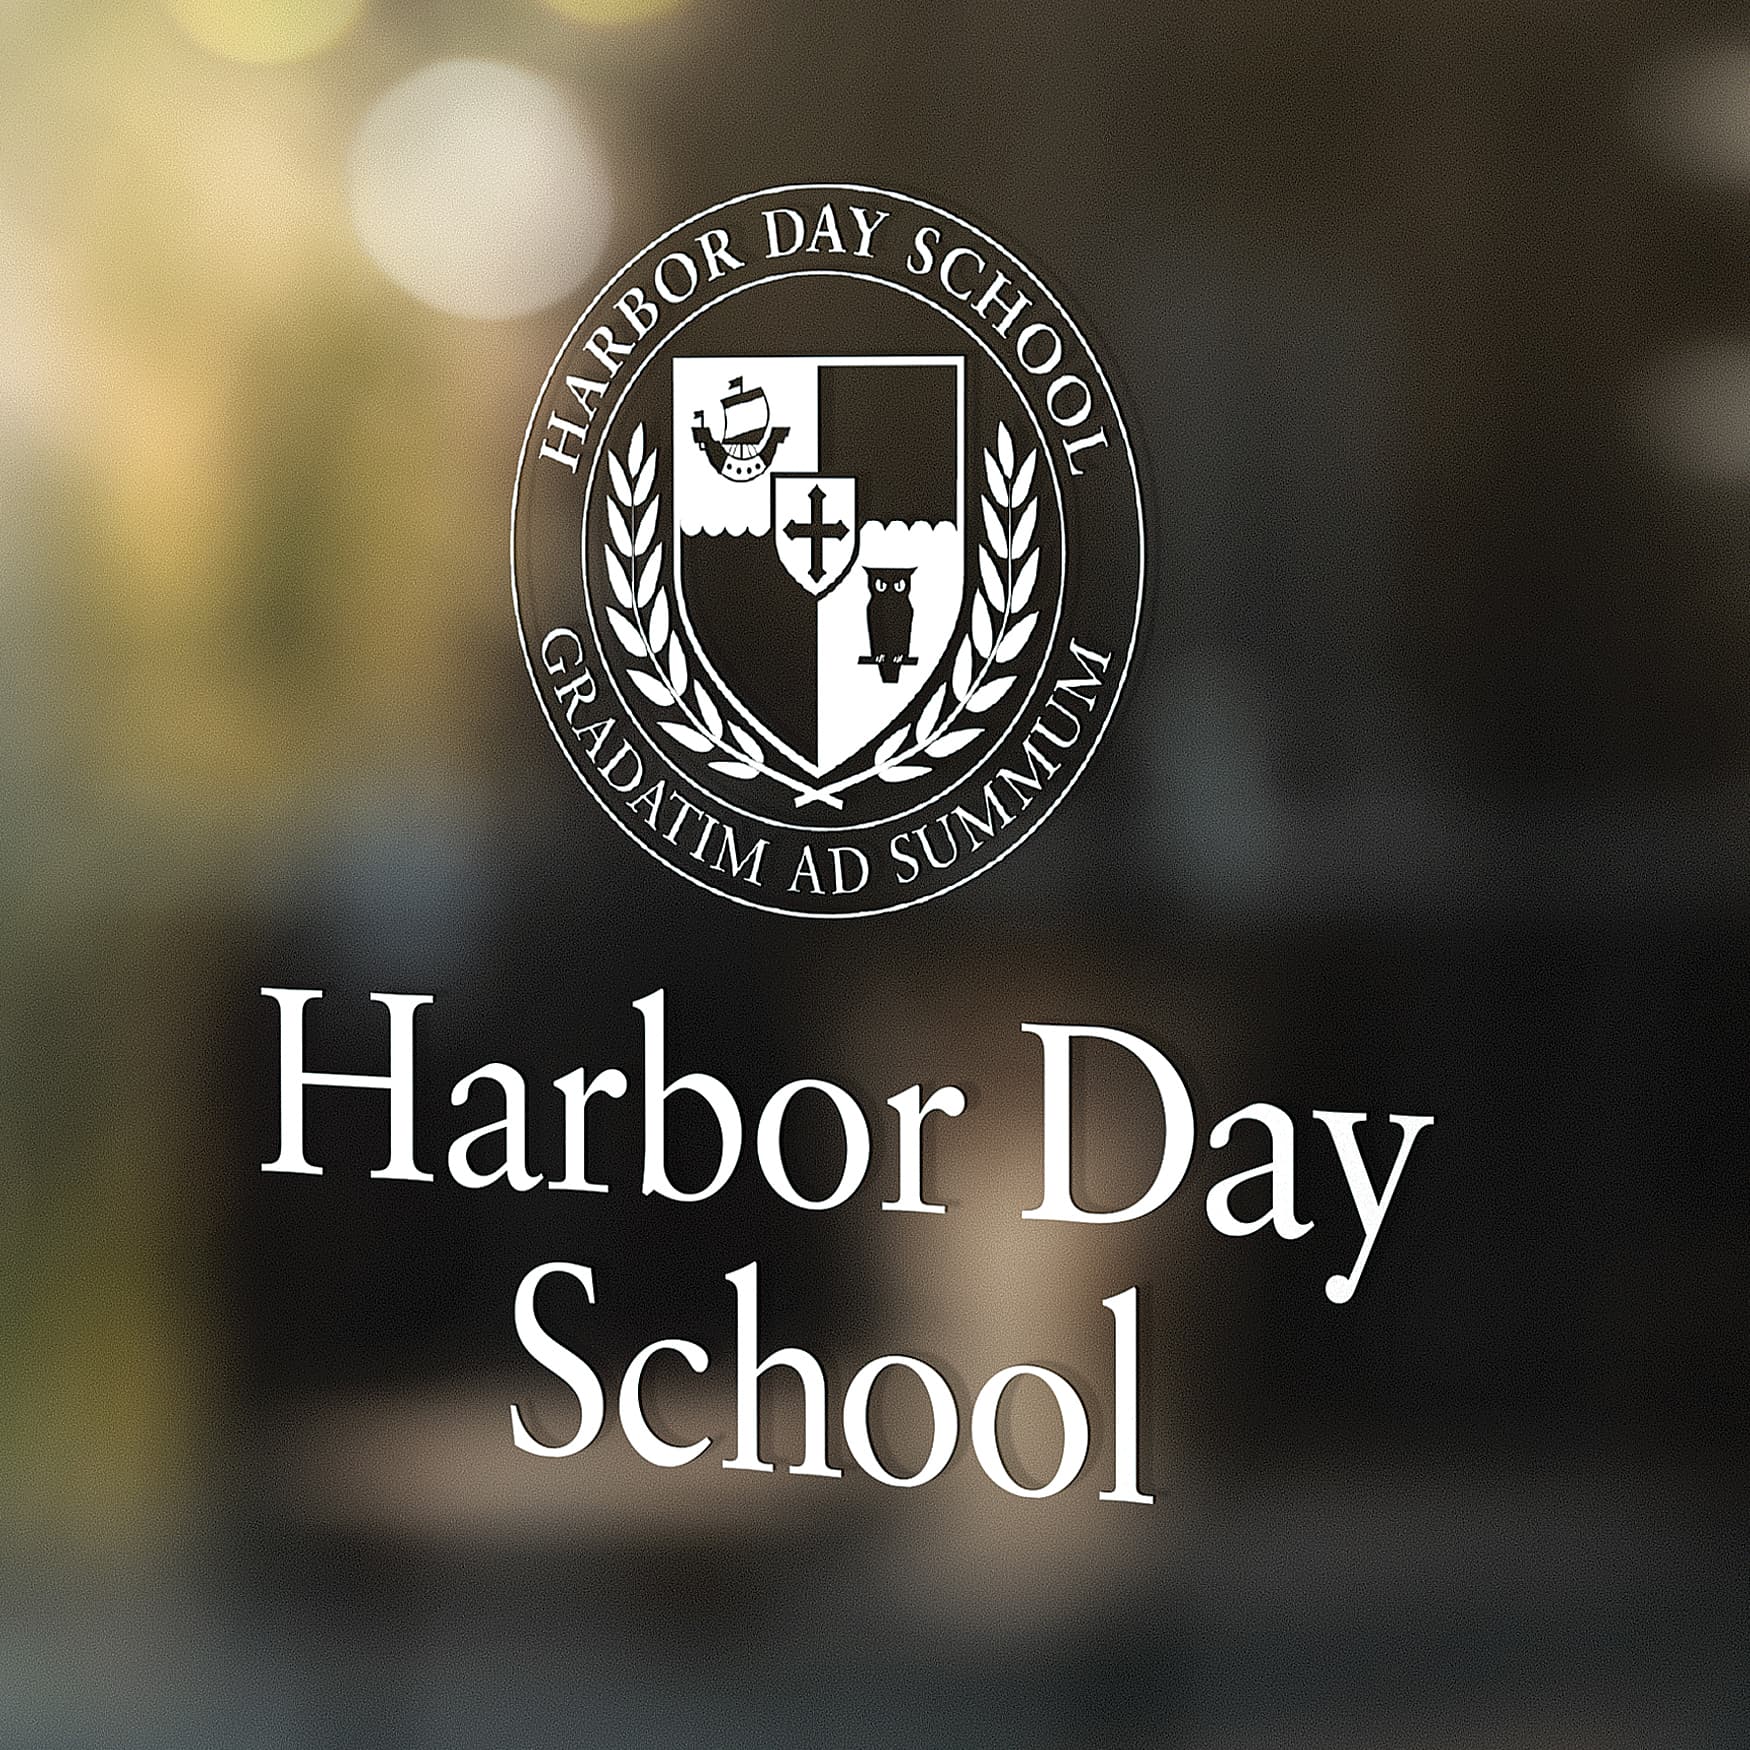 Harbor Day School logo printed on a glass reflective window.